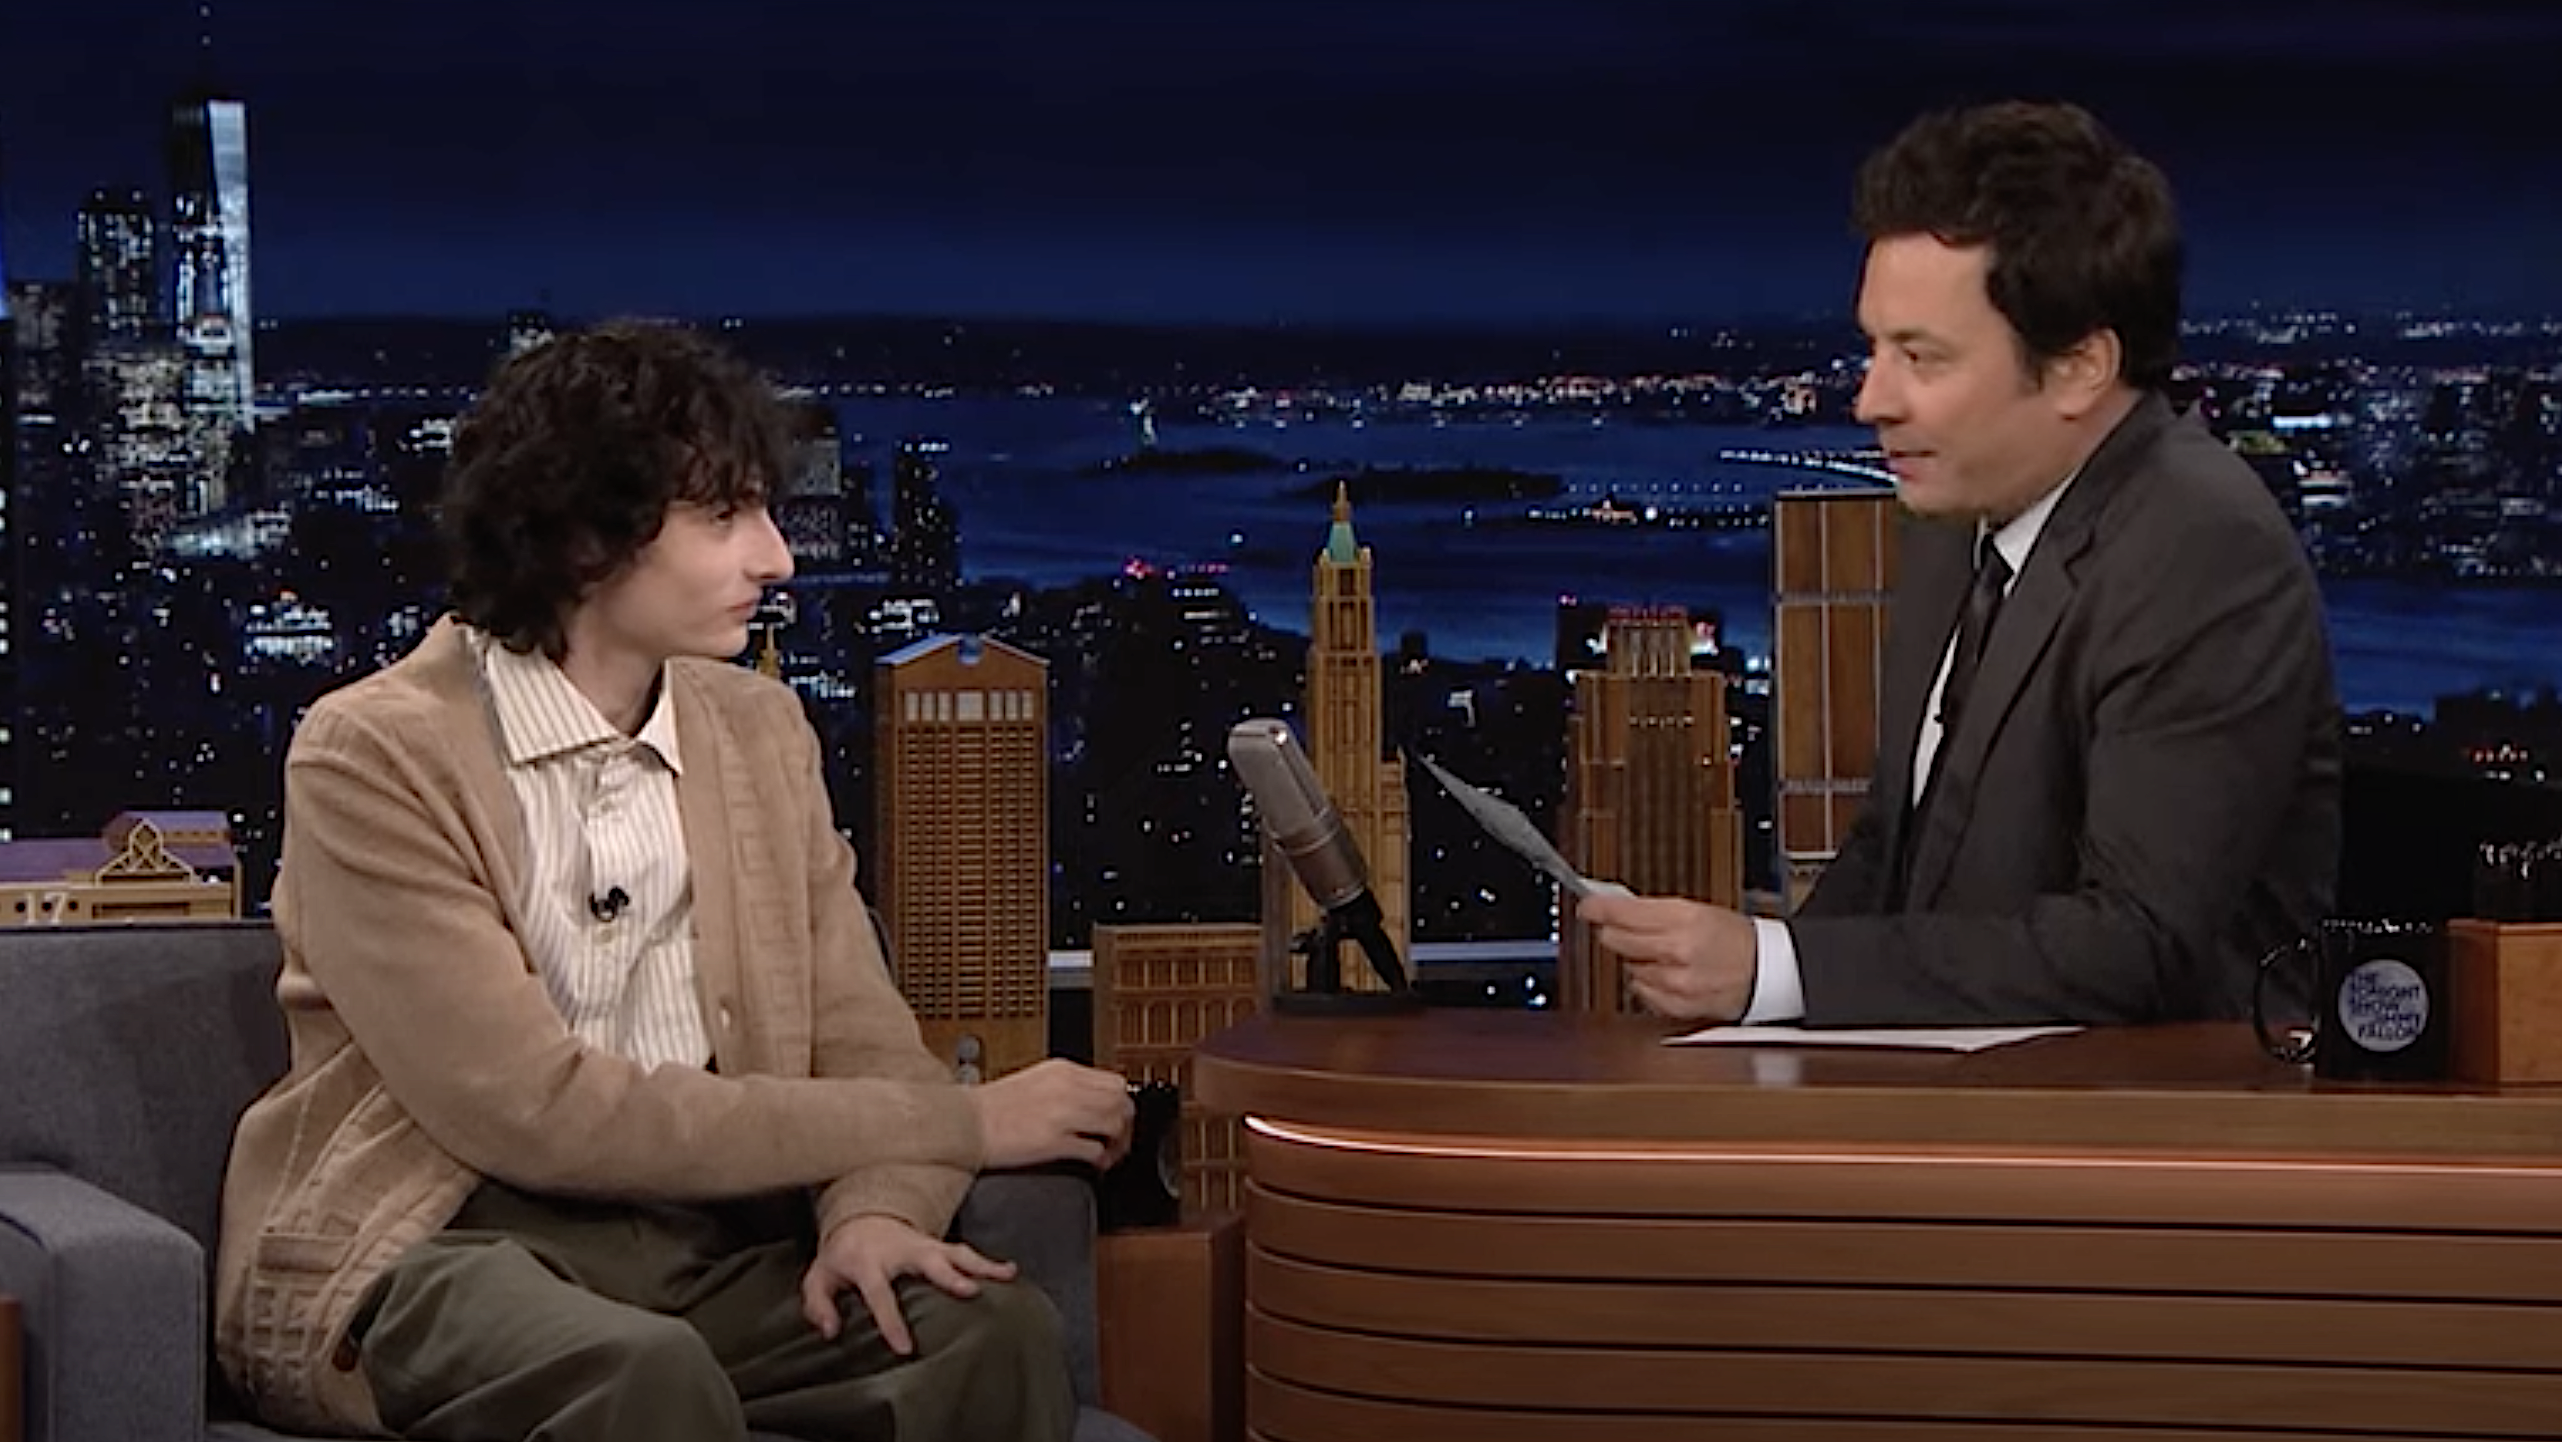 Finn Wolfhard practices his poker face while Jimmy Fallon asks about Stranger Things rumors